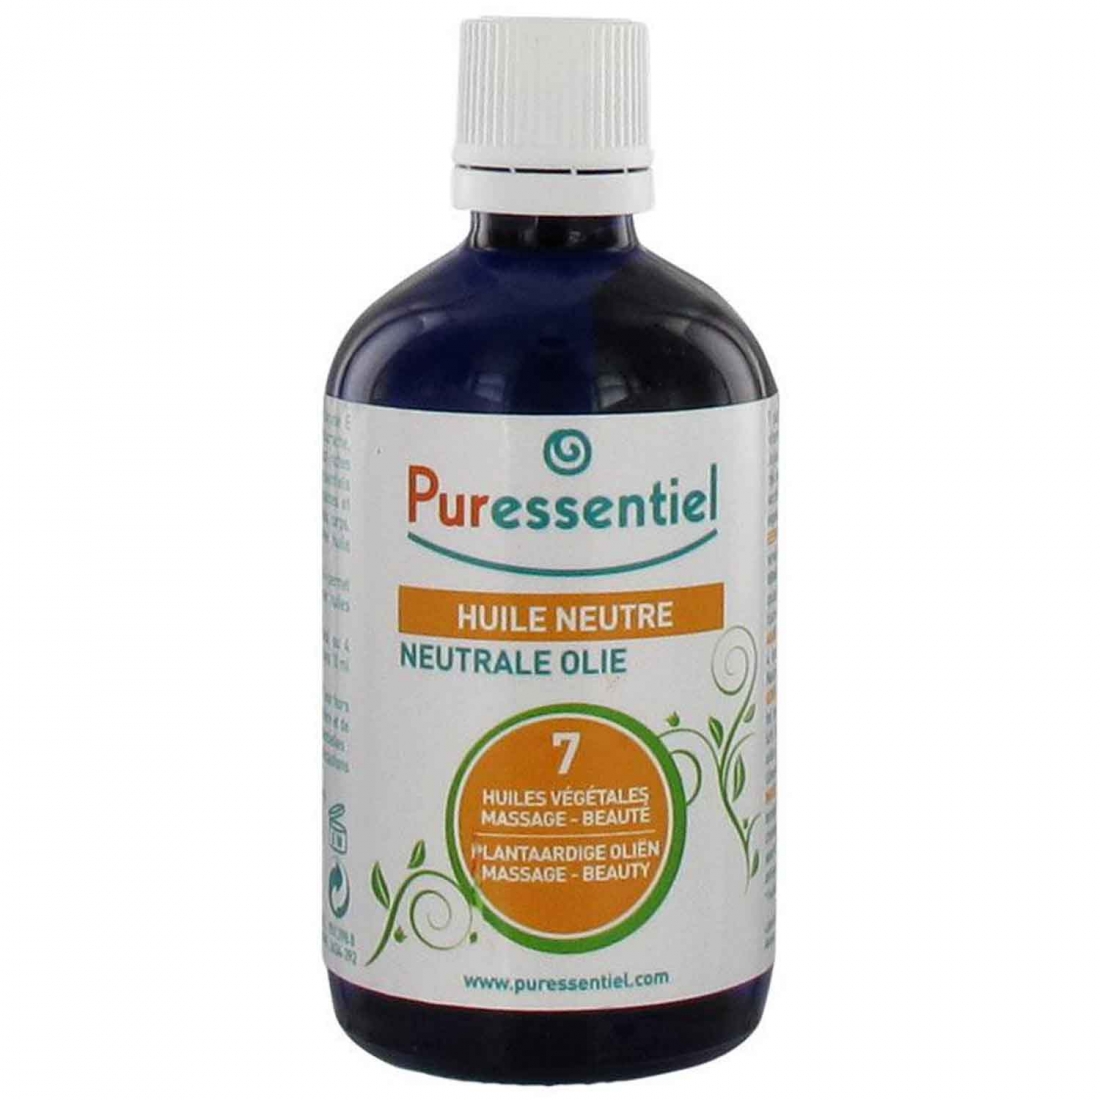 Puressentiel - Neutral Oil with 7 Plant Oils - 100 ml